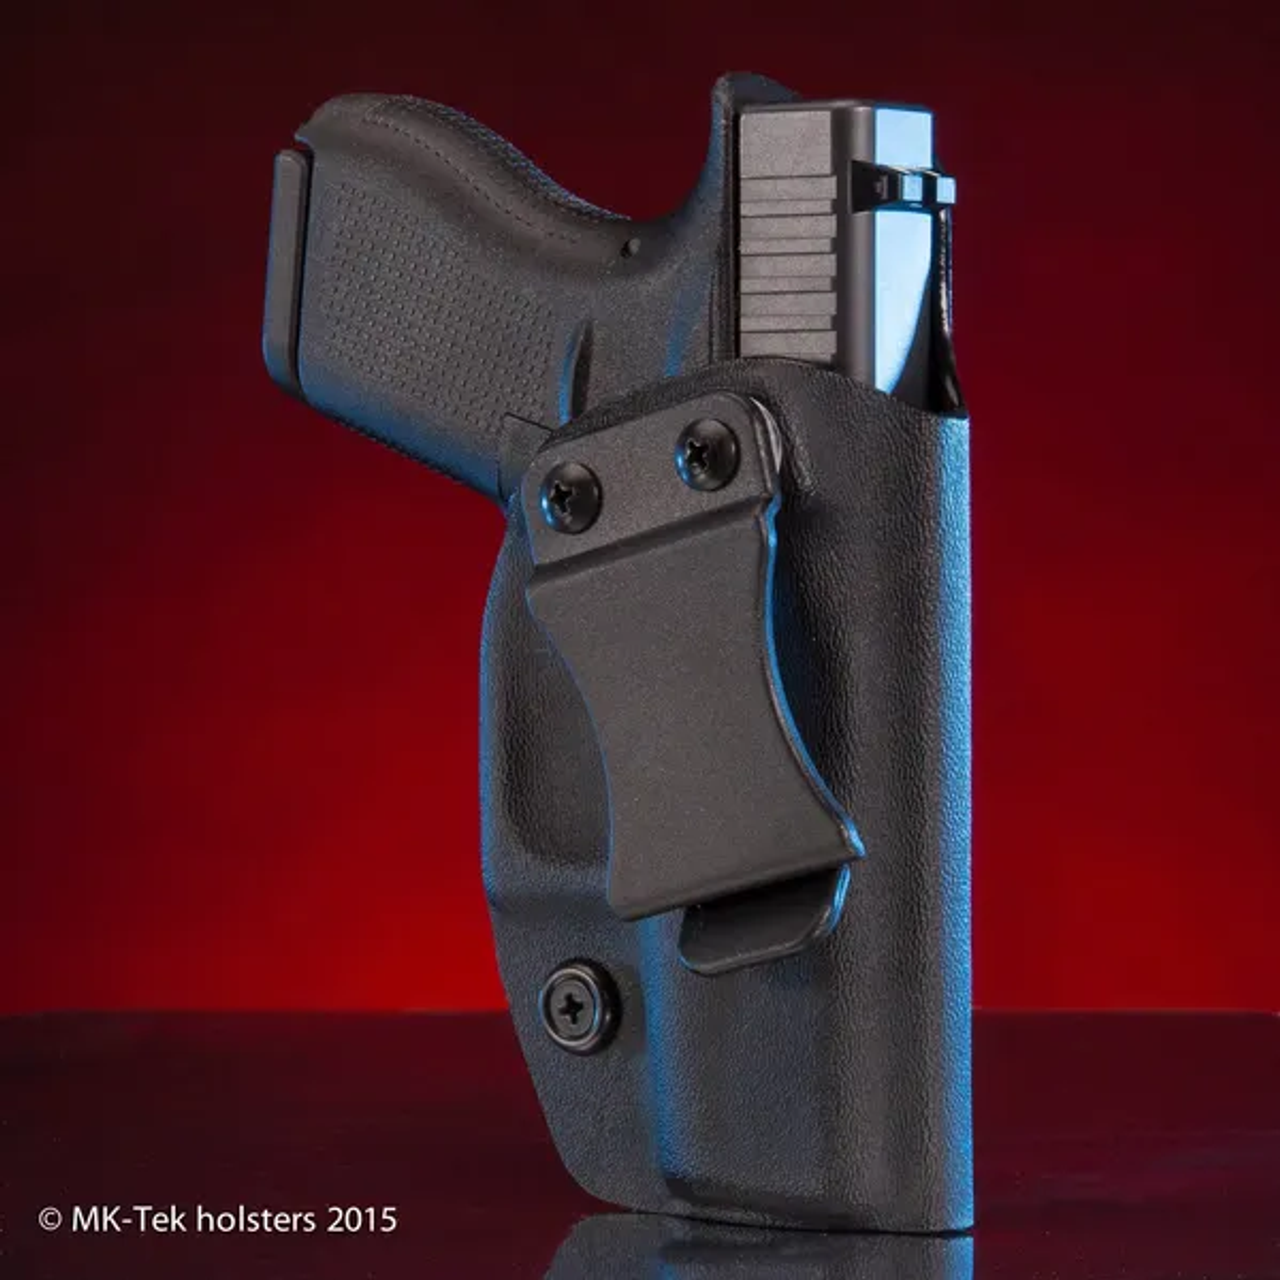 IWB Holster Ideal for AIWB Carry